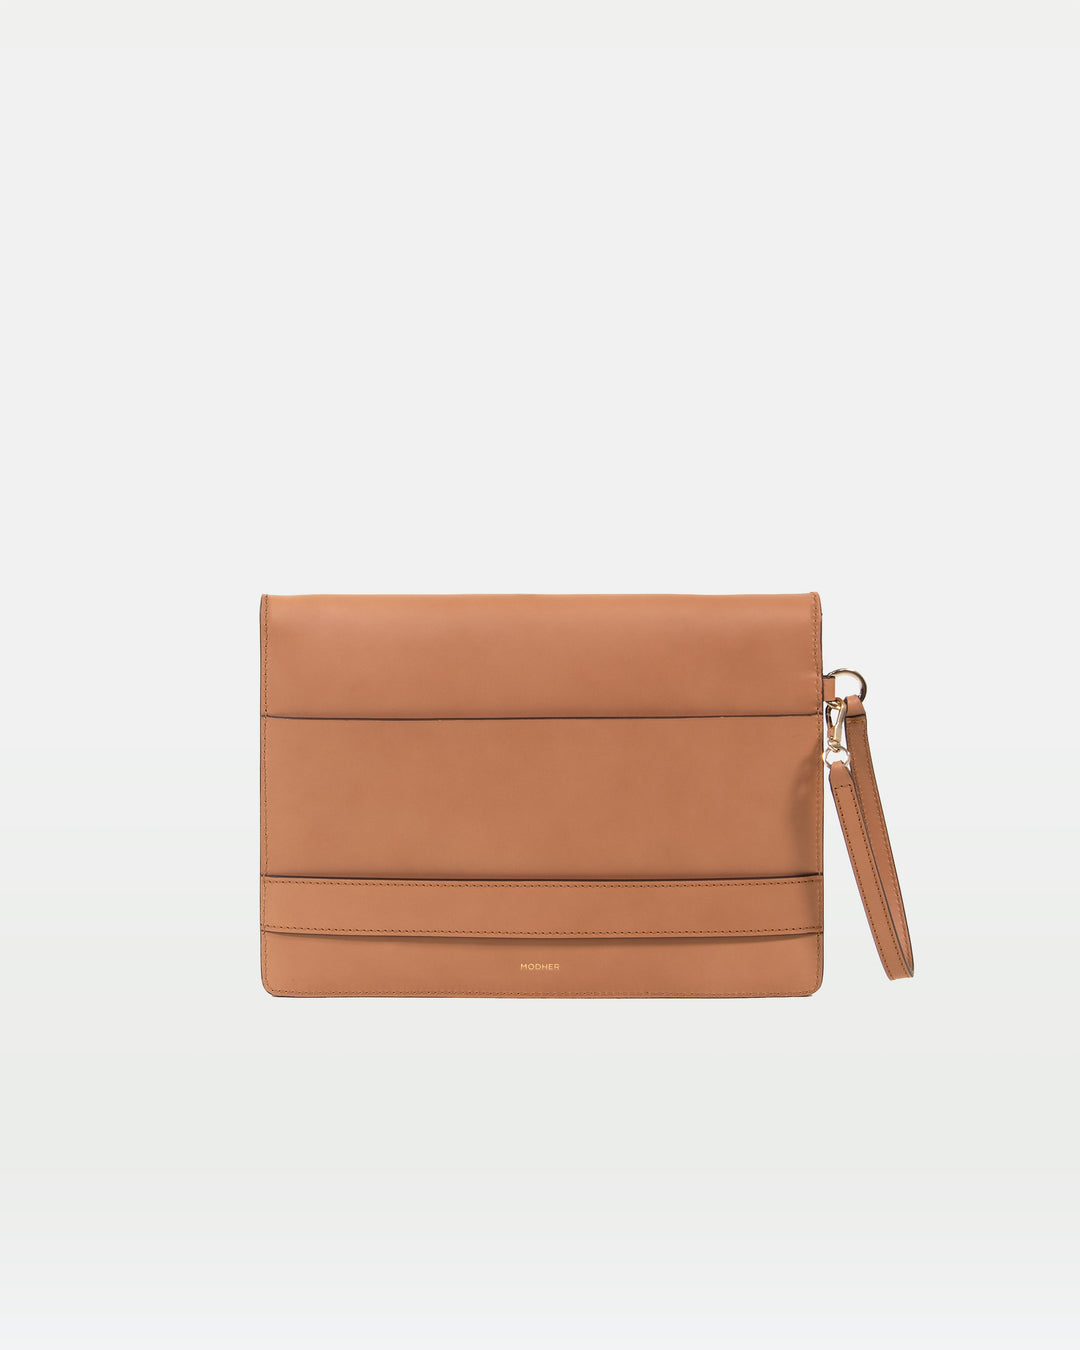 MODHER Envelope Clutch in Naturale vegetable tanned leather#color_naturale